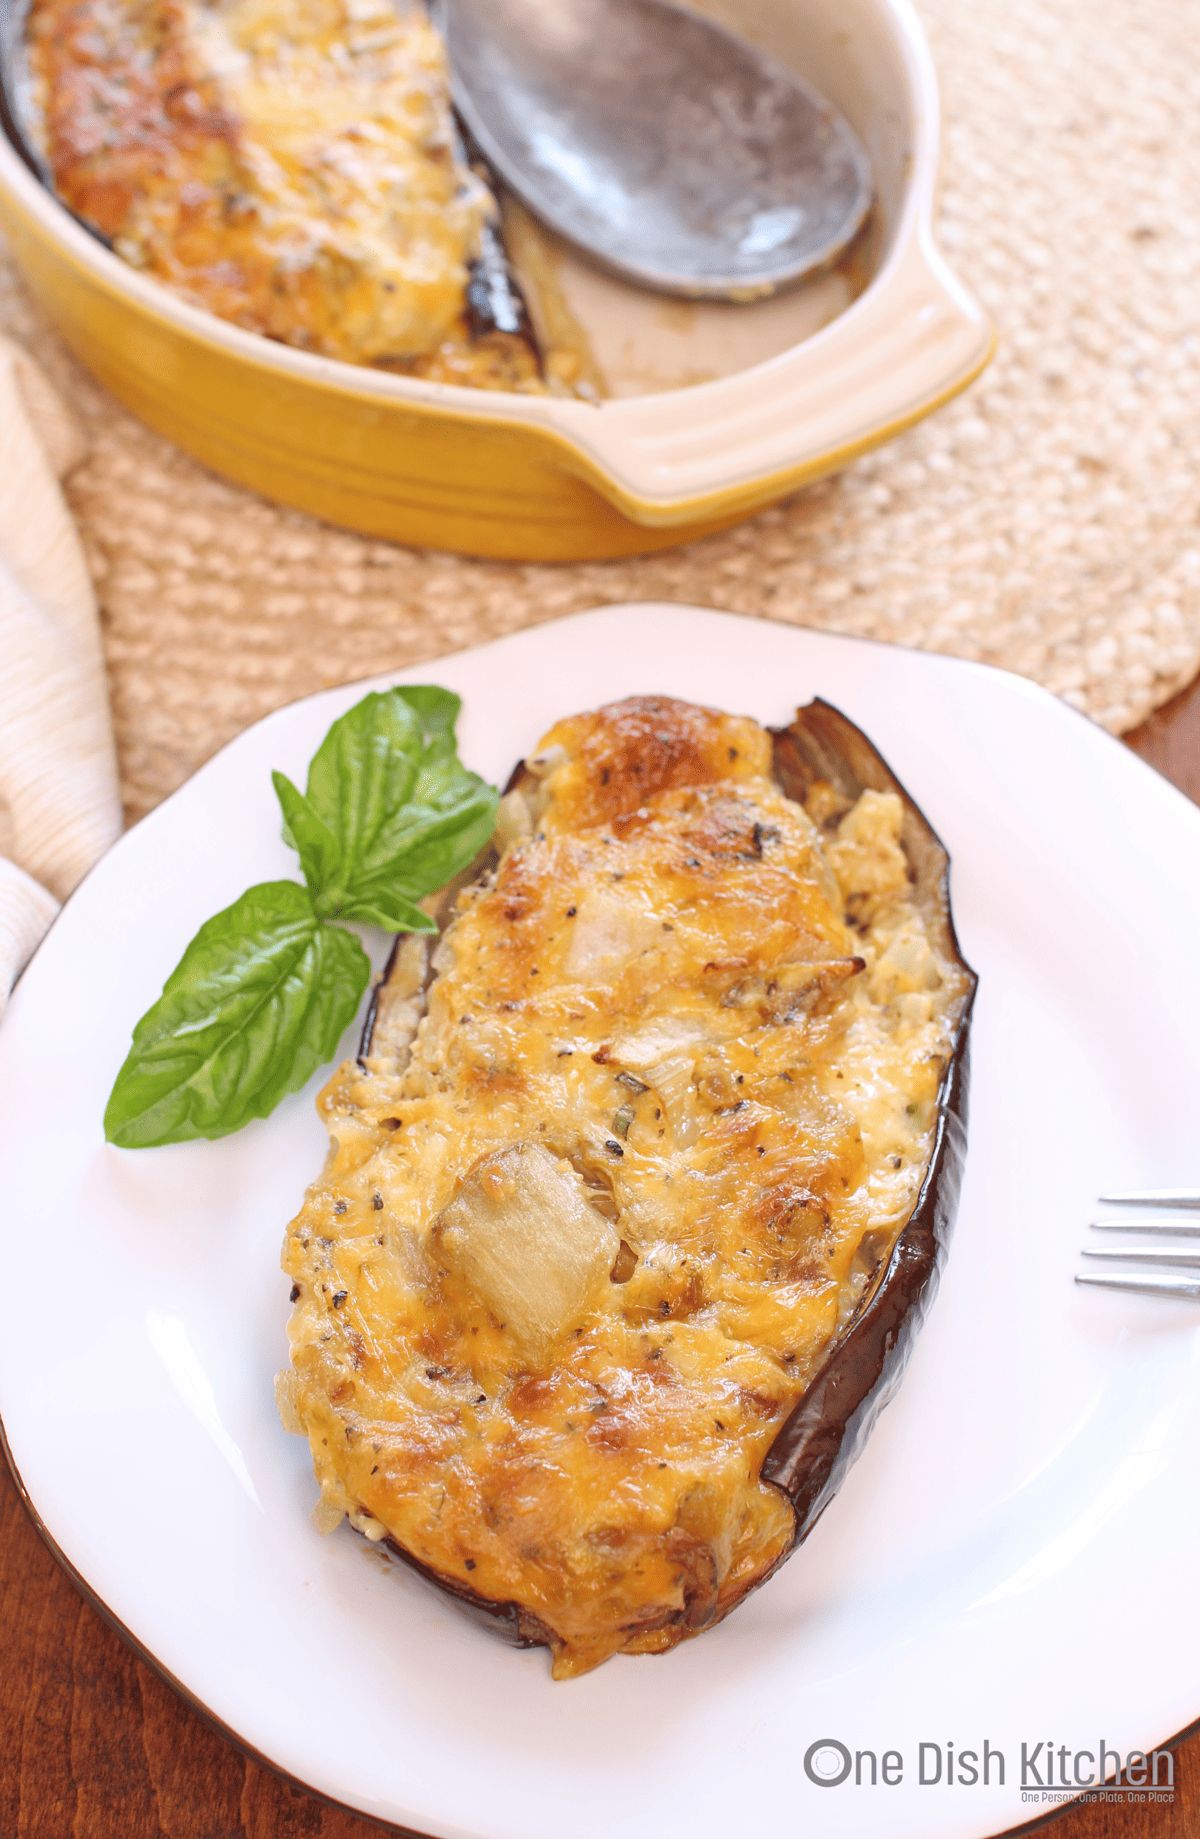 twice baked eggplant on white plate with basil leaf.